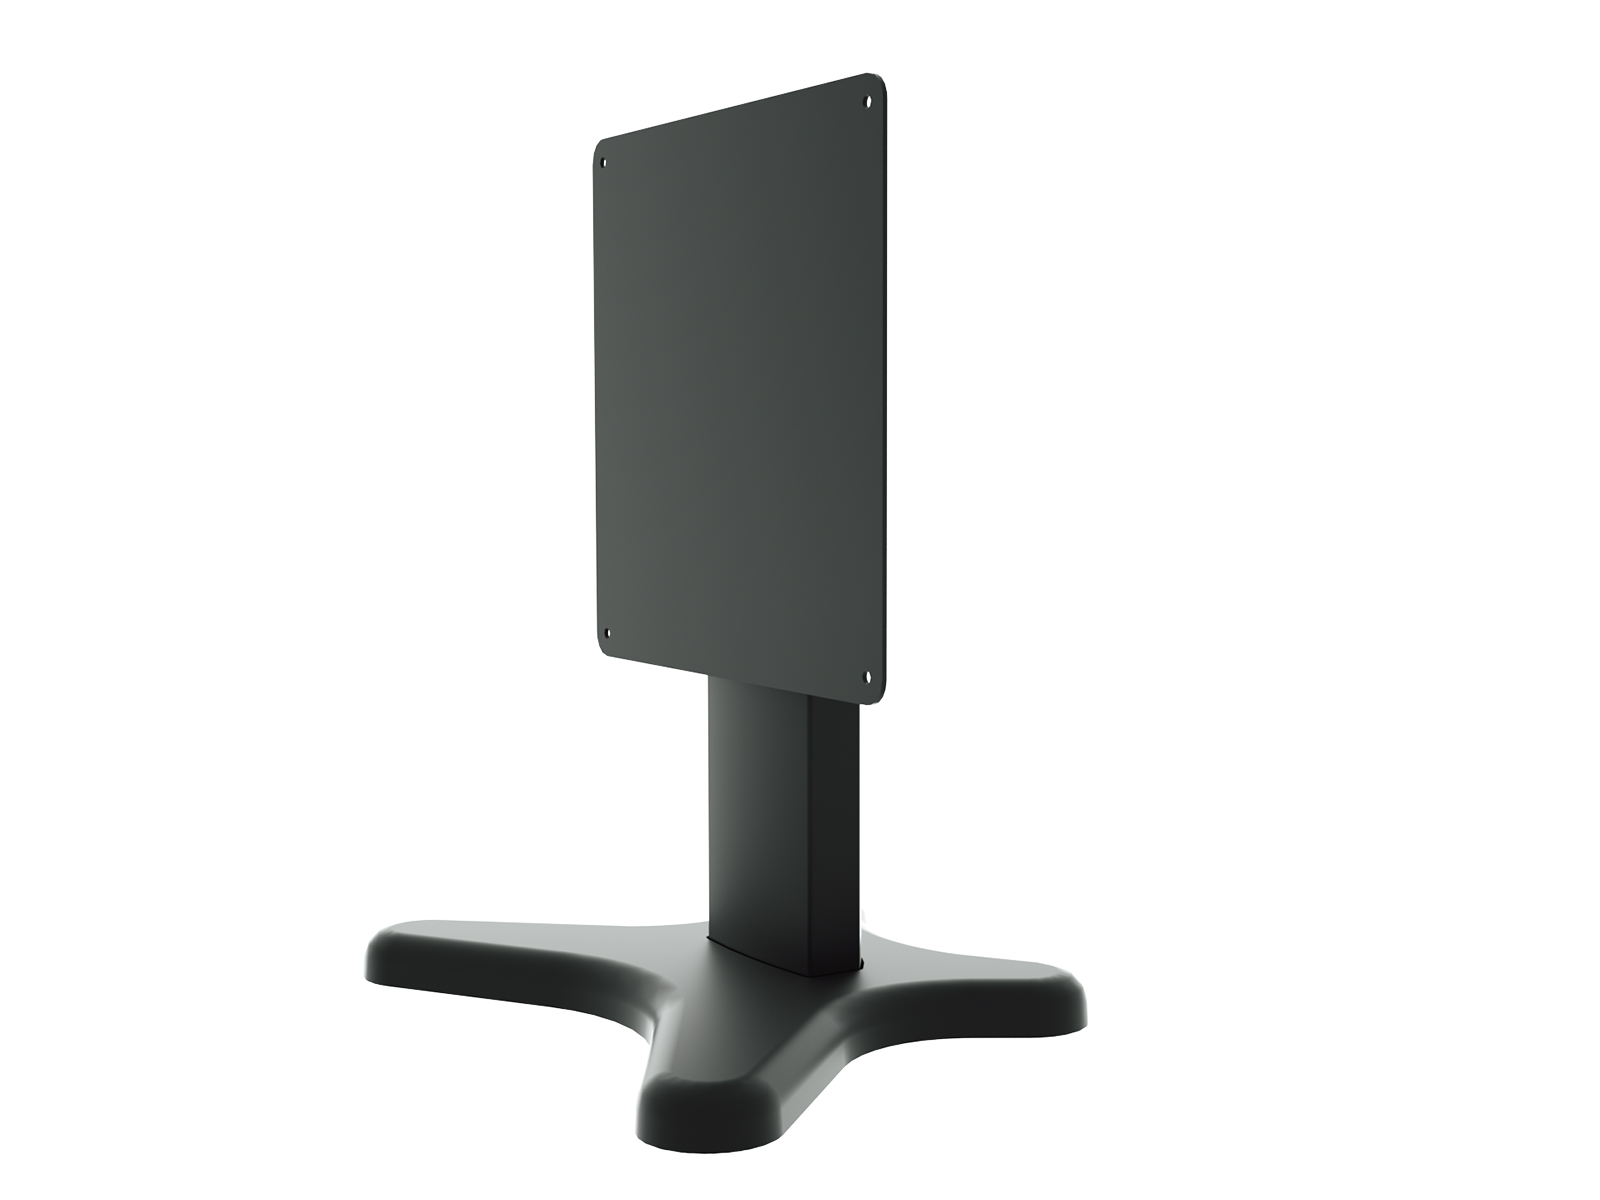 Xstand Desktop Stand Featured Image